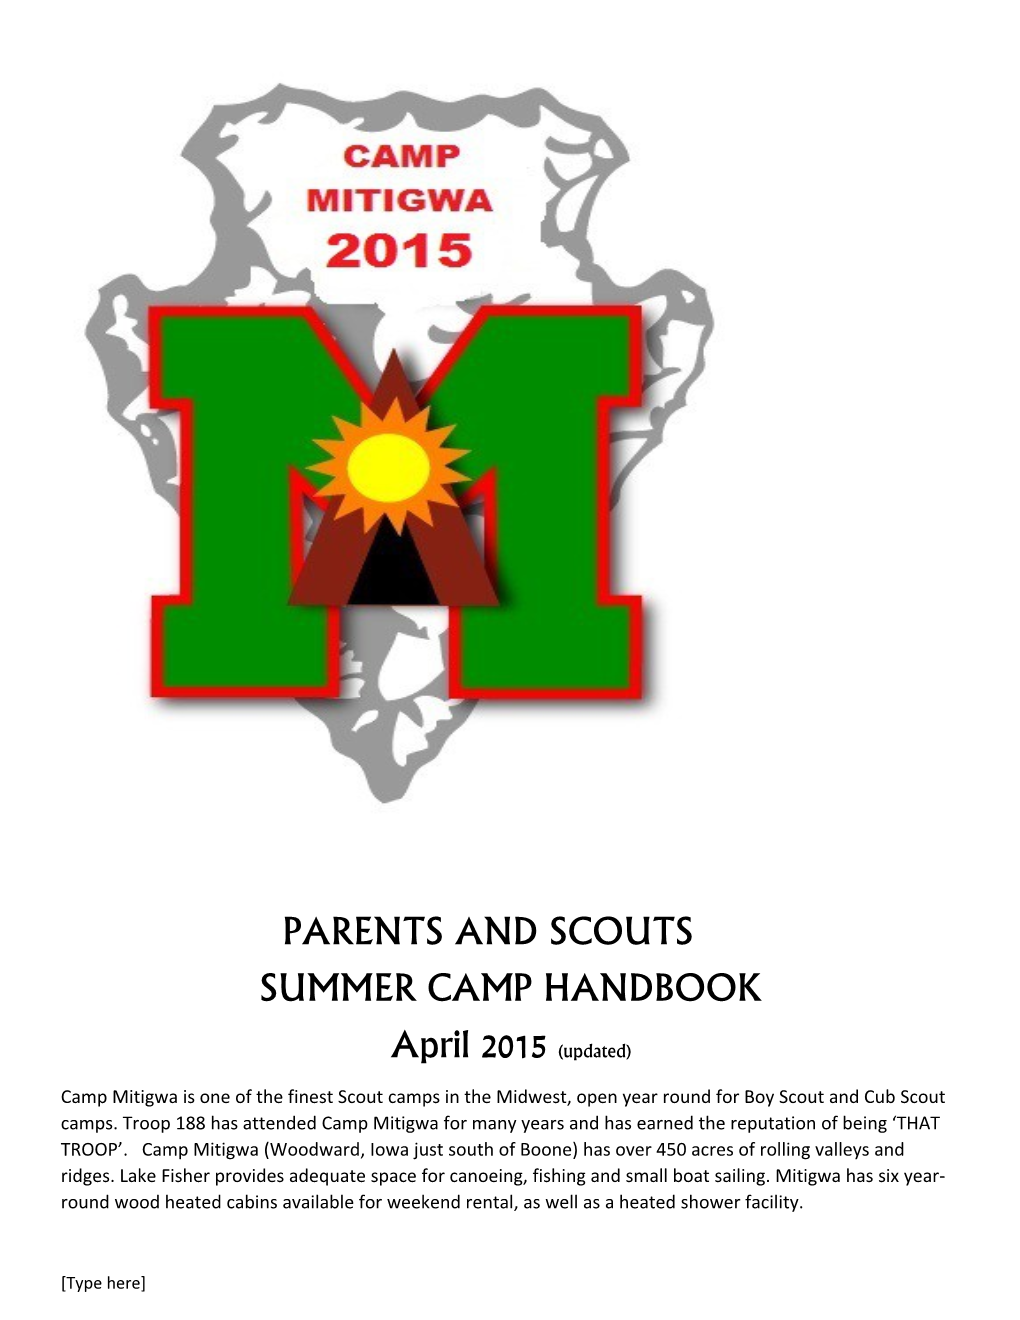 Parents and Scouts